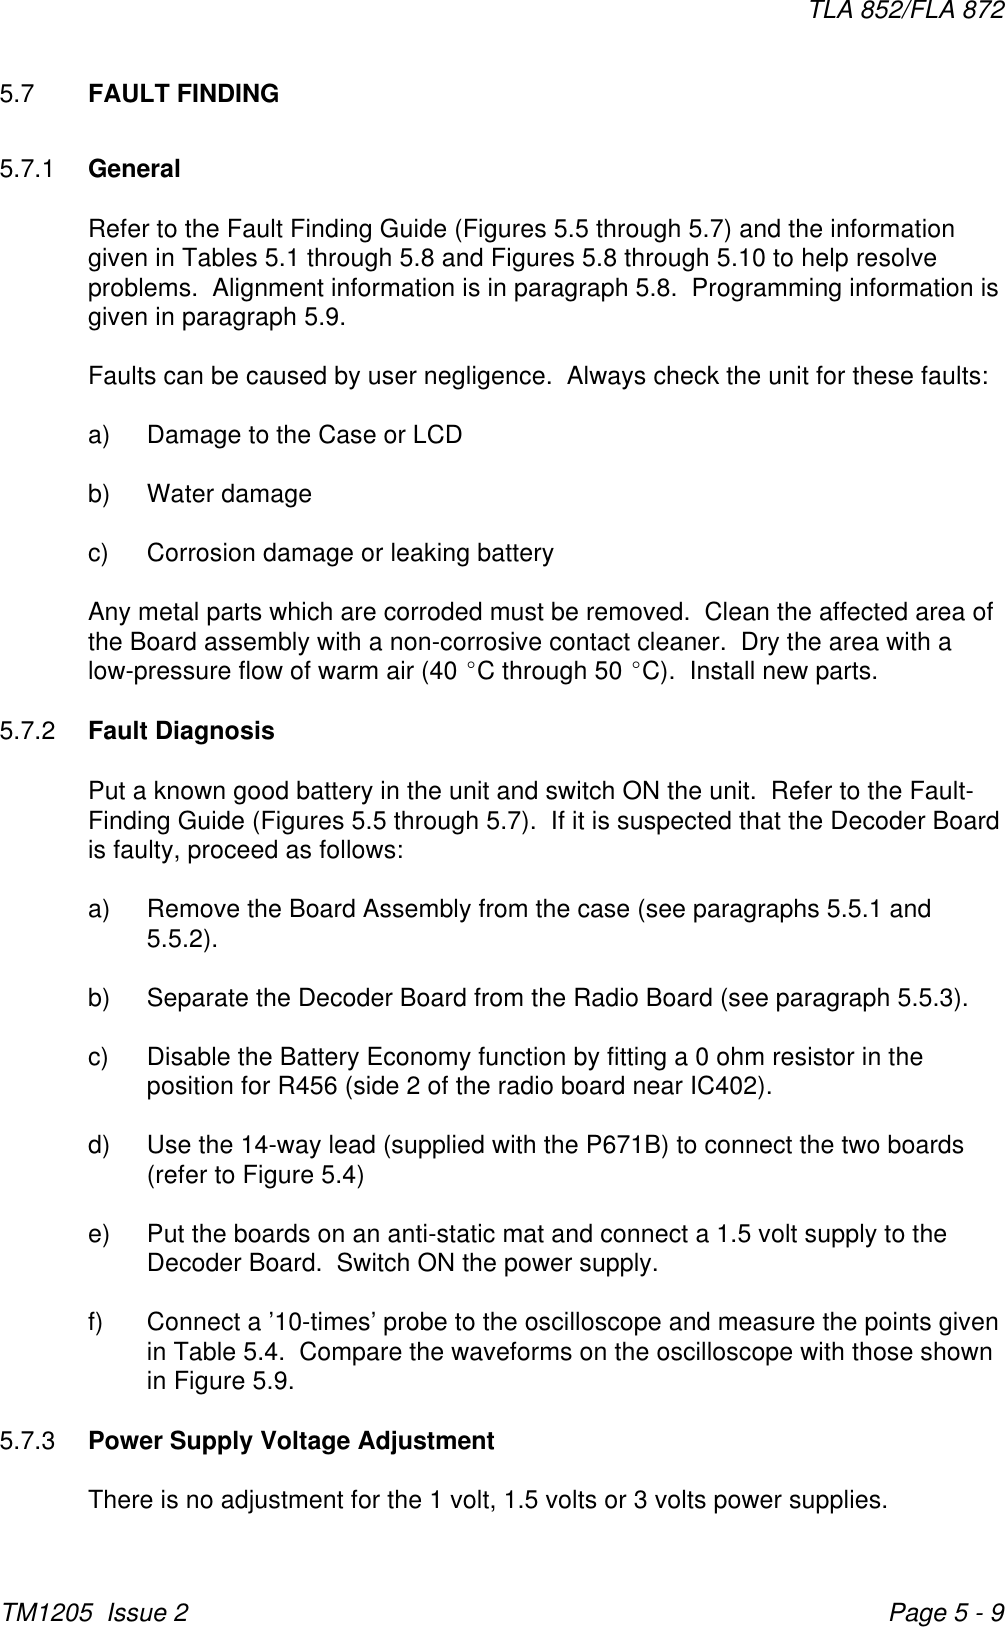 TLA 852/FLA 872TM1205  Issue 2 Page 5 - 95.7 FAULT FINDING5.7.1 GeneralRefer to the Fault Finding Guide (Figures 5.5 through 5.7) and the informationgiven in Tables 5.1 through 5.8 and Figures 5.8 through 5.10 to help resolveproblems.  Alignment information is in paragraph 5.8.  Programming information isgiven in paragraph 5.9.Faults can be caused by user negligence.  Always check the unit for these faults:a) Damage to the Case or LCDb) Water damagec) Corrosion damage or leaking batteryAny metal parts which are corroded must be removed.  Clean the affected area ofthe Board assembly with a non-corrosive contact cleaner.  Dry the area with alow-pressure flow of warm air (40 EC through 50 EC).  Install new parts.5.7.2 Fault DiagnosisPut a known good battery in the unit and switch ON the unit.  Refer to the Fault-Finding Guide (Figures 5.5 through 5.7).  If it is suspected that the Decoder Boardis faulty, proceed as follows:a) Remove the Board Assembly from the case (see paragraphs 5.5.1 and5.5.2).b) Separate the Decoder Board from the Radio Board (see paragraph 5.5.3).c) Disable the Battery Economy function by fitting a 0 ohm resistor in theposition for R456 (side 2 of the radio board near IC402).d) Use the 14-way lead (supplied with the P671B) to connect the two boards(refer to Figure 5.4)e) Put the boards on an anti-static mat and connect a 1.5 volt supply to theDecoder Board.  Switch ON the power supply.f) Connect a ’10-times’ probe to the oscilloscope and measure the points givenin Table 5.4.  Compare the waveforms on the oscilloscope with those shownin Figure 5.9.5.7.3 Power Supply Voltage AdjustmentThere is no adjustment for the 1 volt, 1.5 volts or 3 volts power supplies.